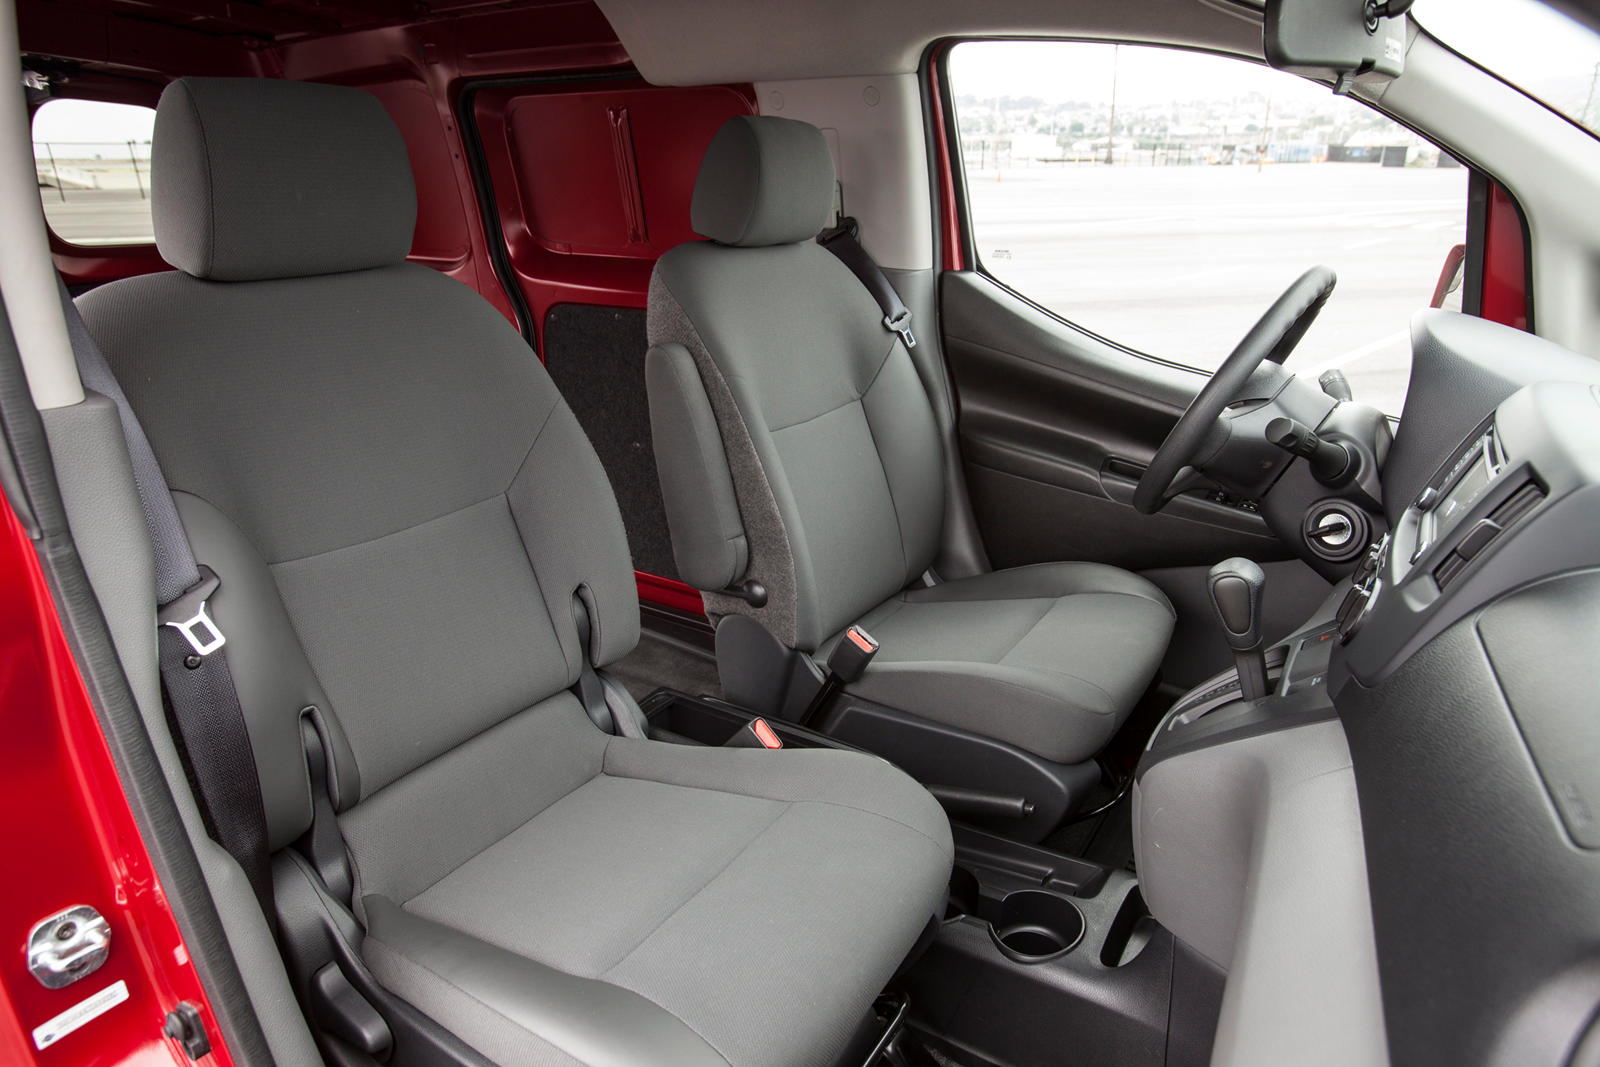 2021 Nissan NV200 Compact Cargo Interior Dimensions: Seating, Cargo Space & Trunk  Size - Photos